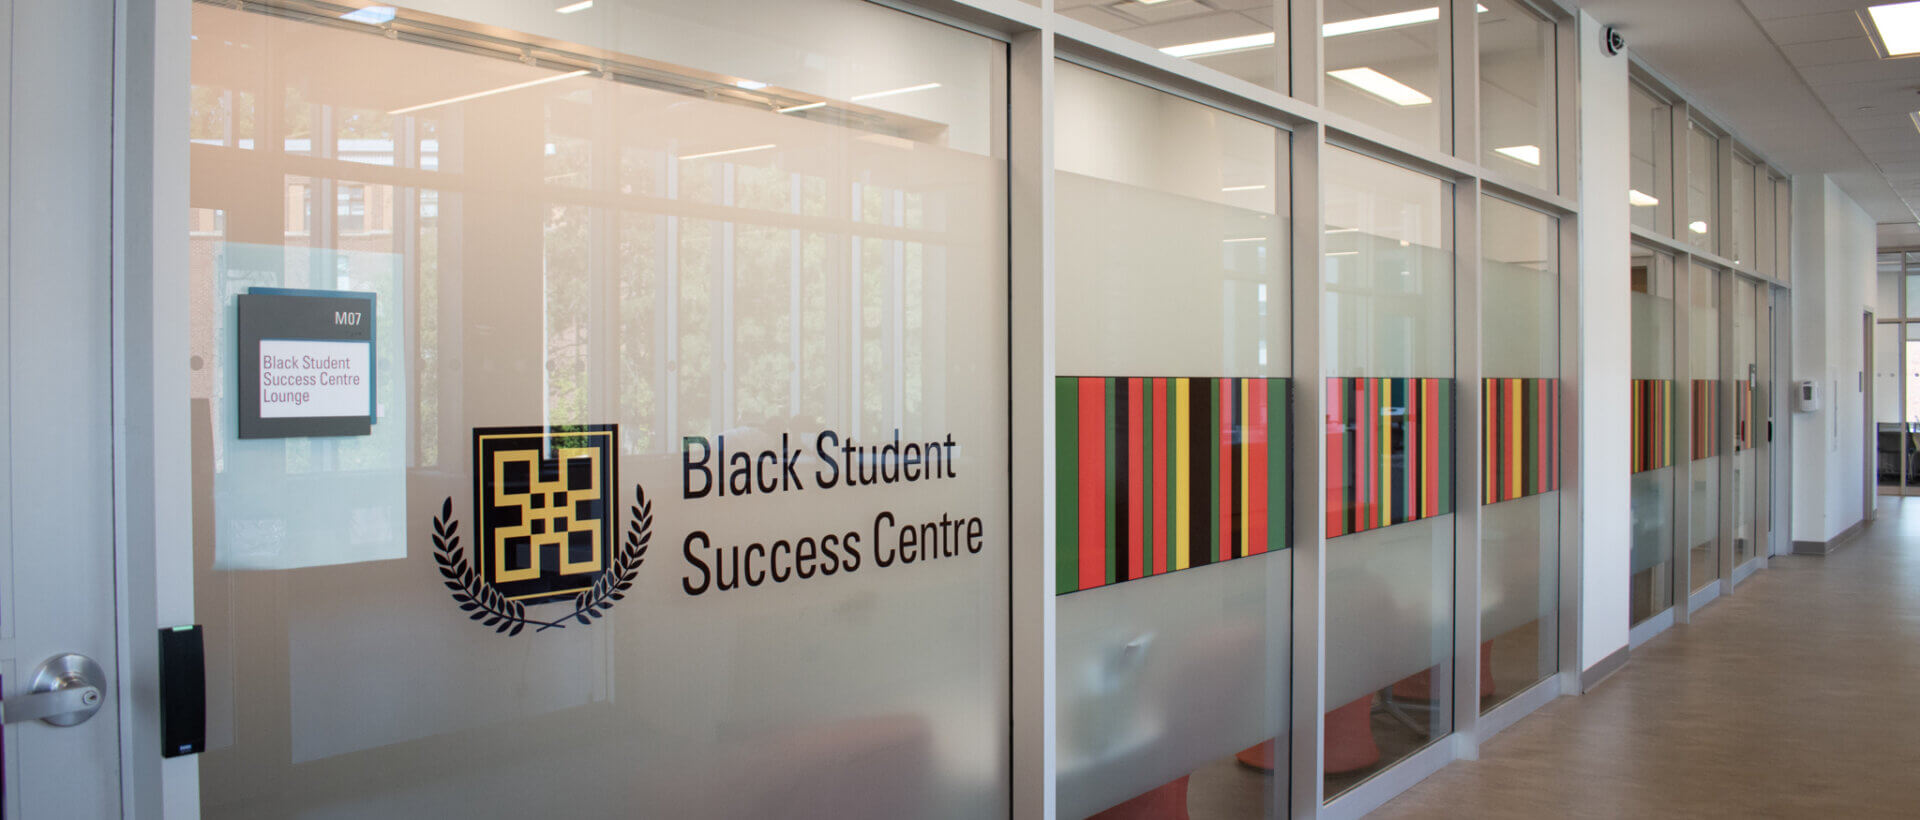 The Black Student Success Centre logo and text on the decorated wall in front of the BSSC lounge.